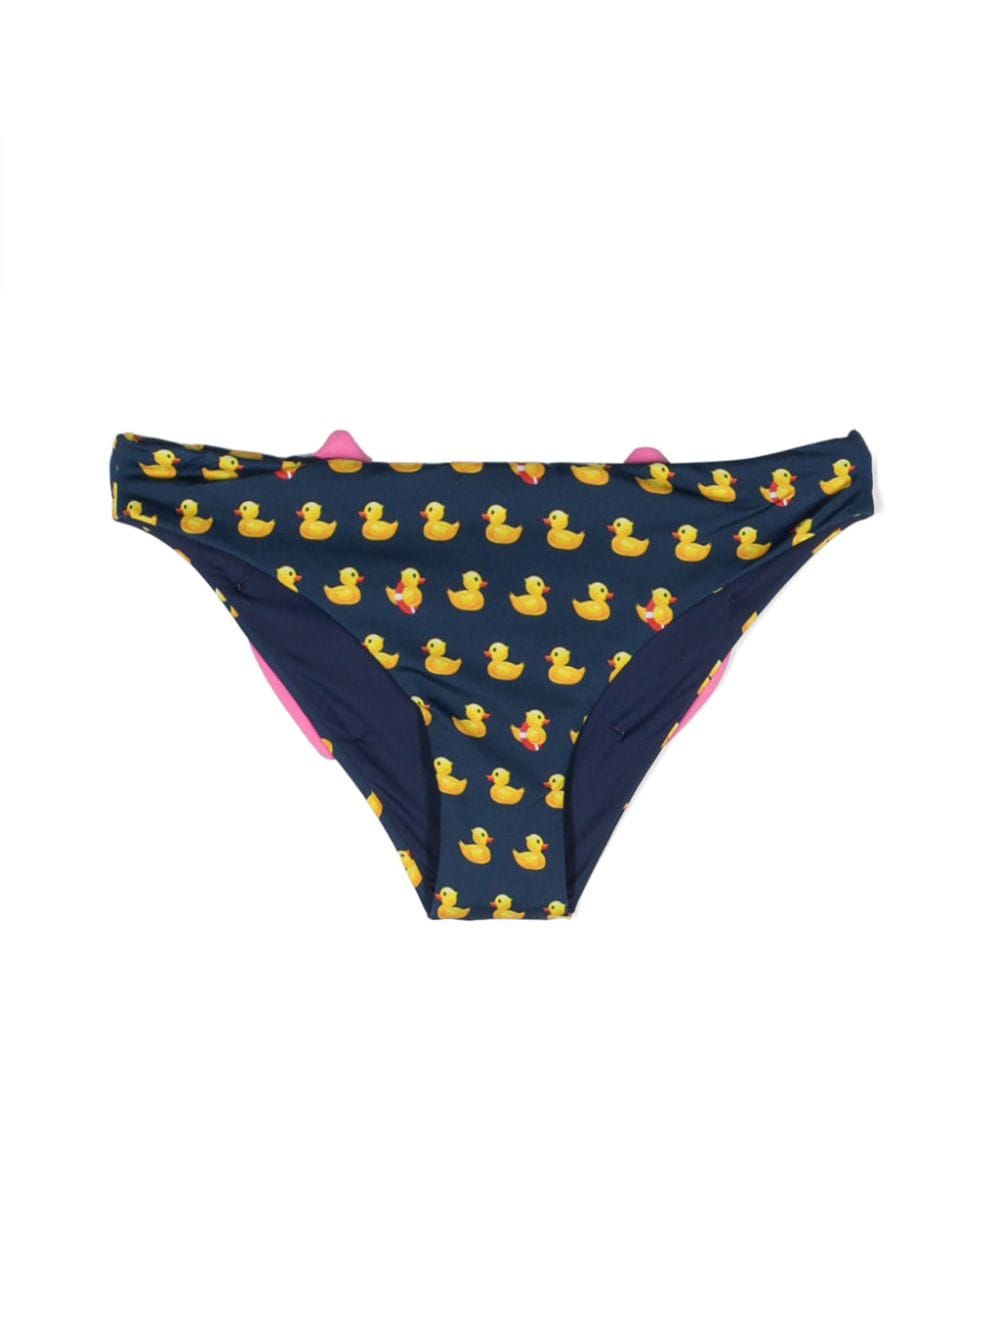 Blue and yellow briefs for girls with duck print